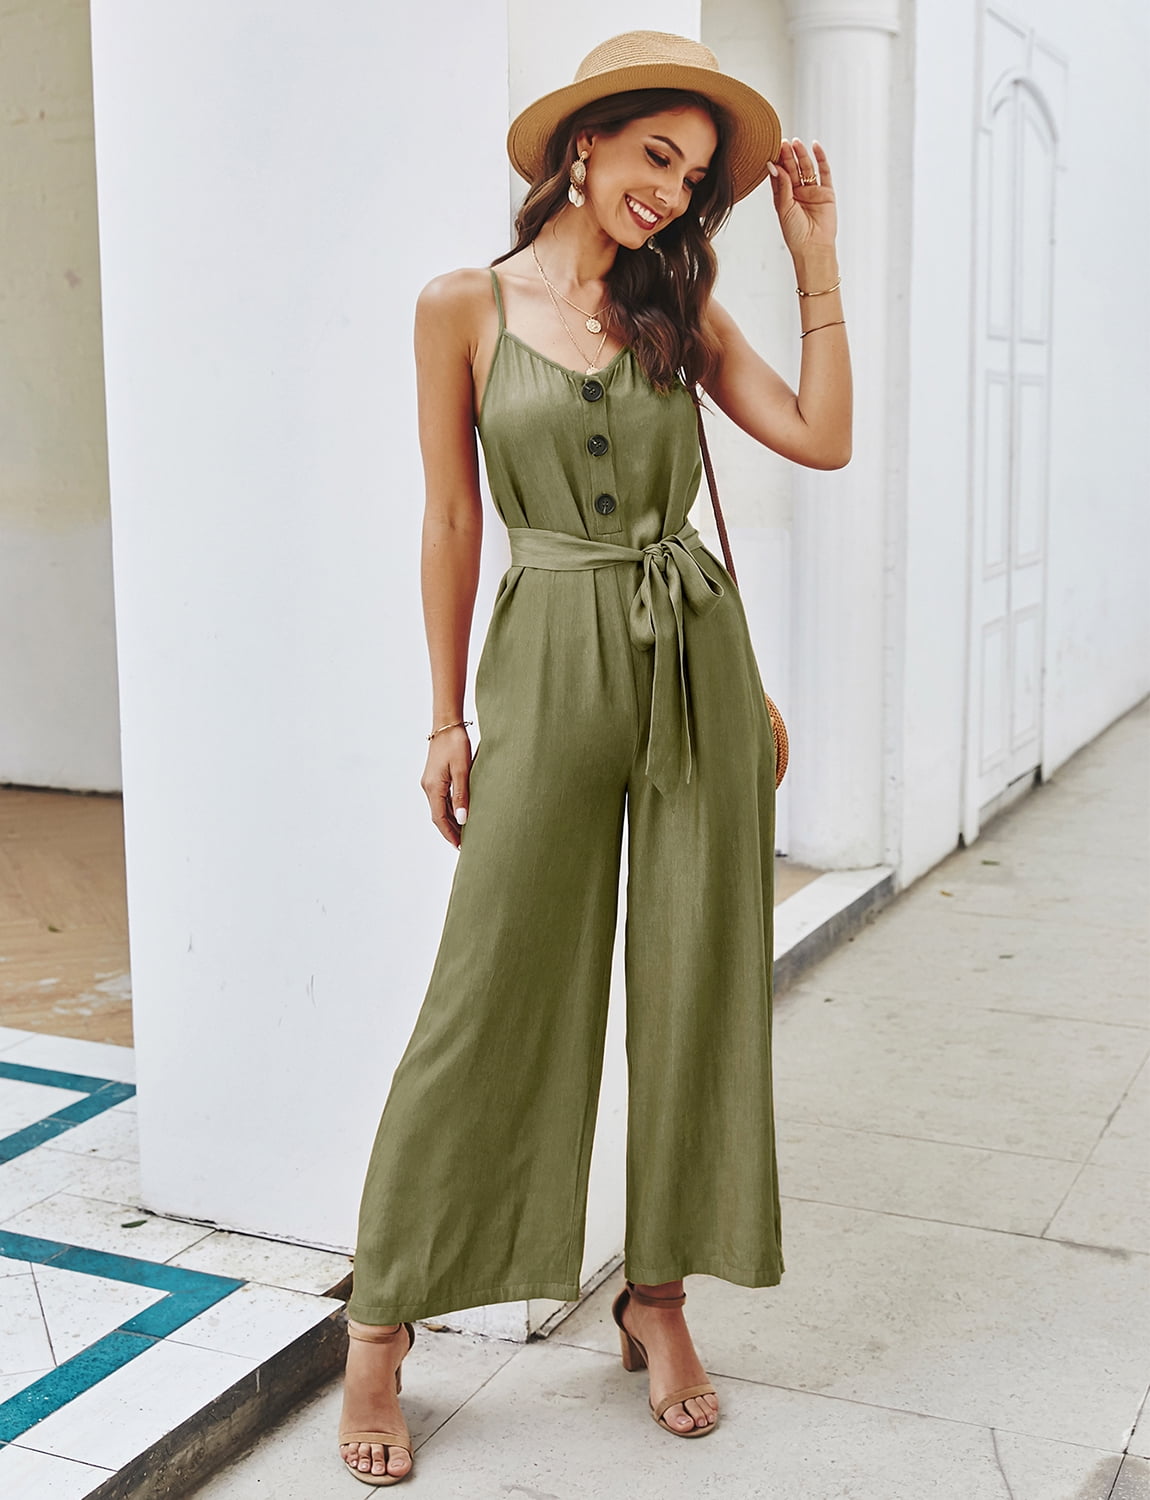 Pervobs Women Sleeveless V-Neck Backless Solid Button High Waisted Wide Leg Jumpsuit Casual Loose Beach Playsuits 